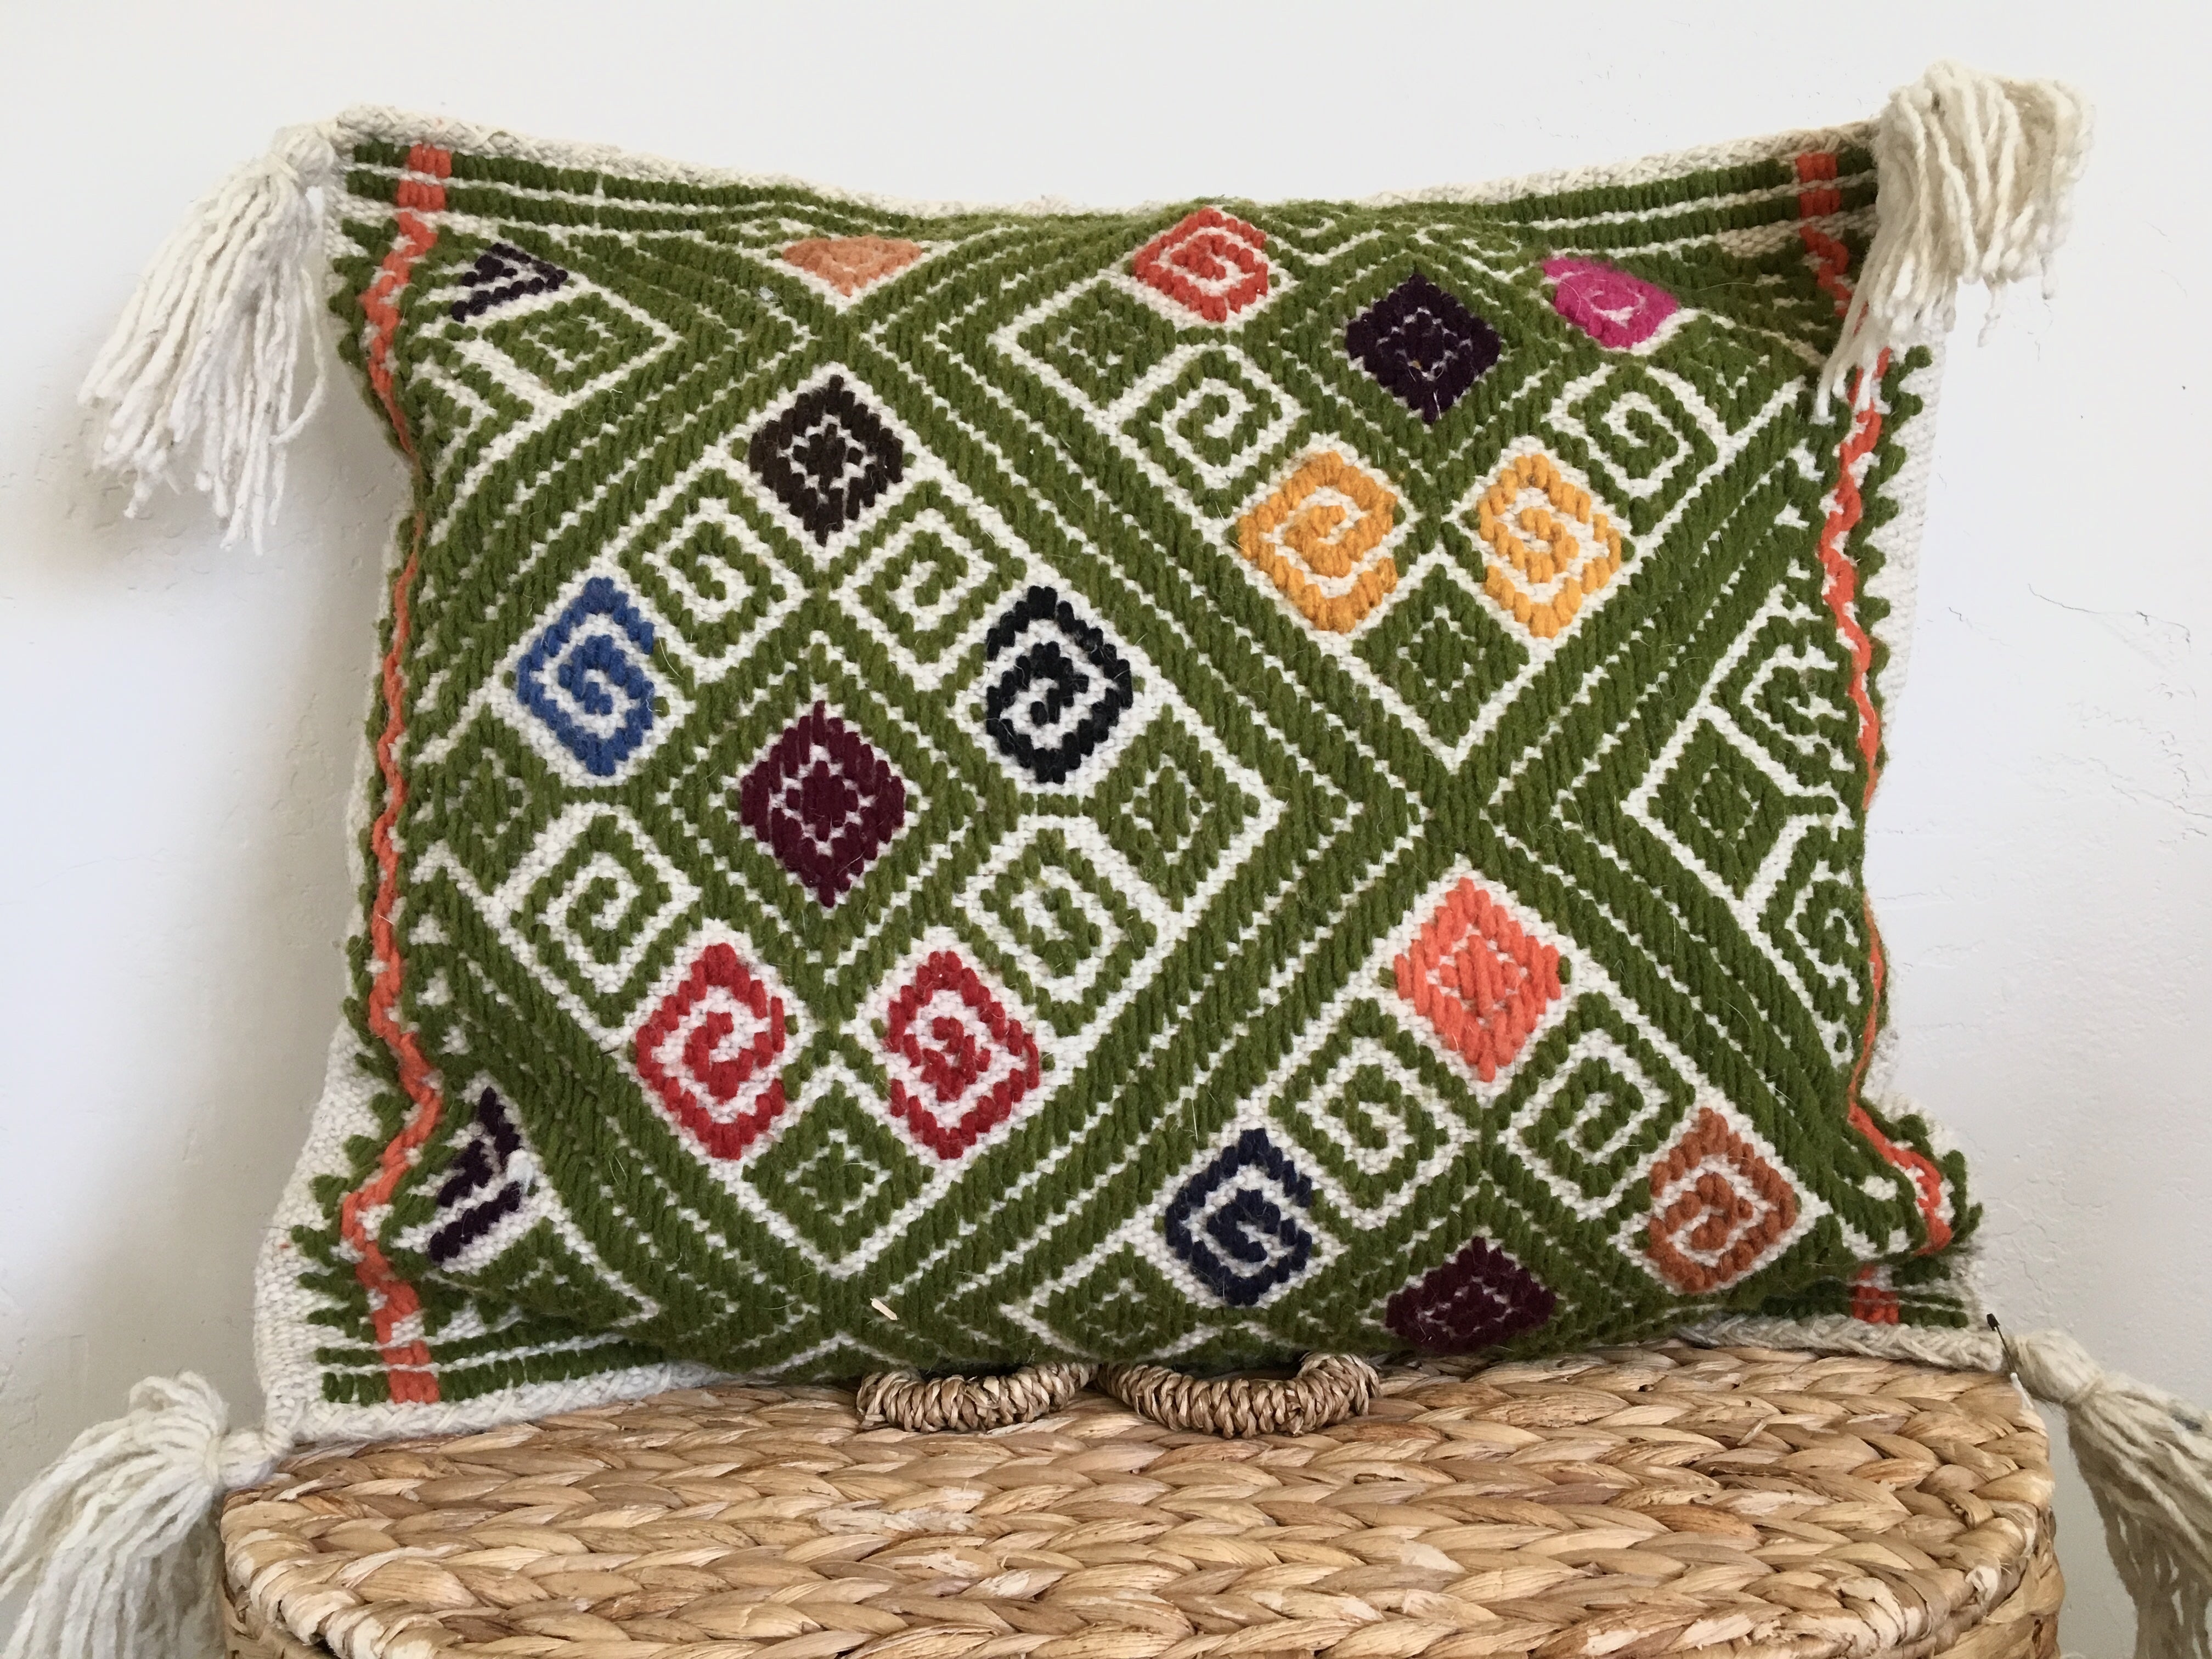 The Verde Pillow Cover